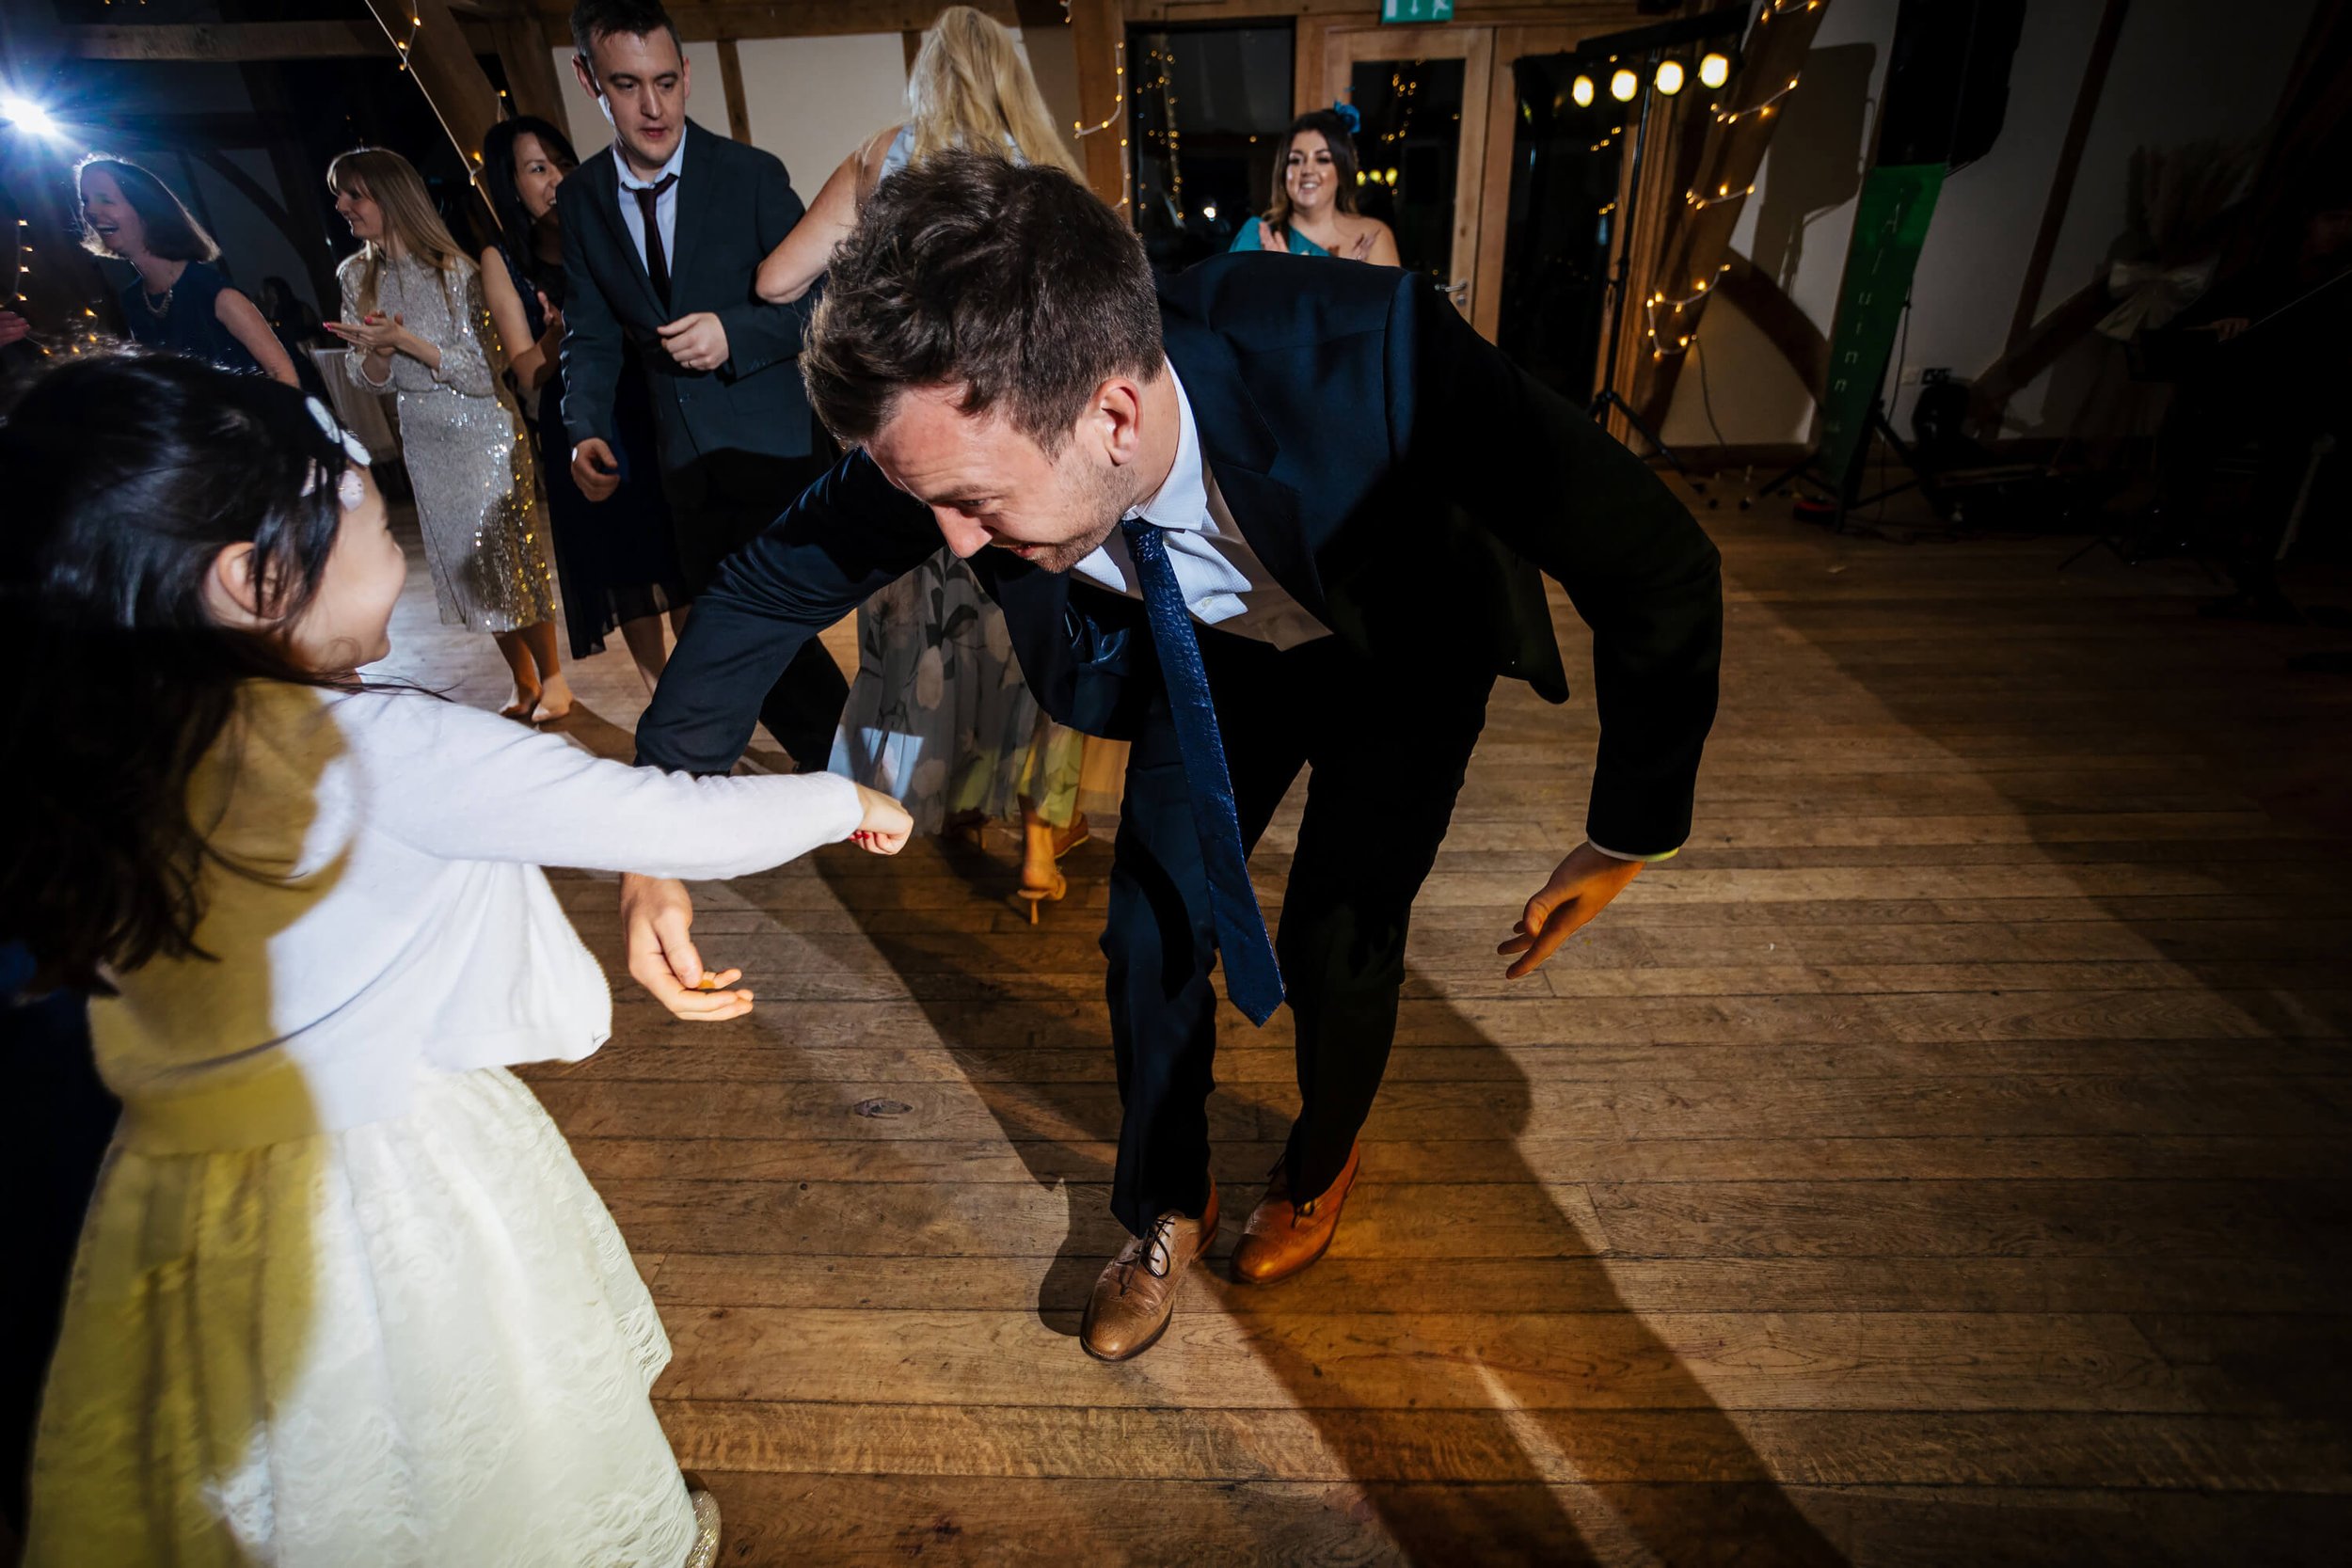 Guest dancing with a young girl at a wedding in York